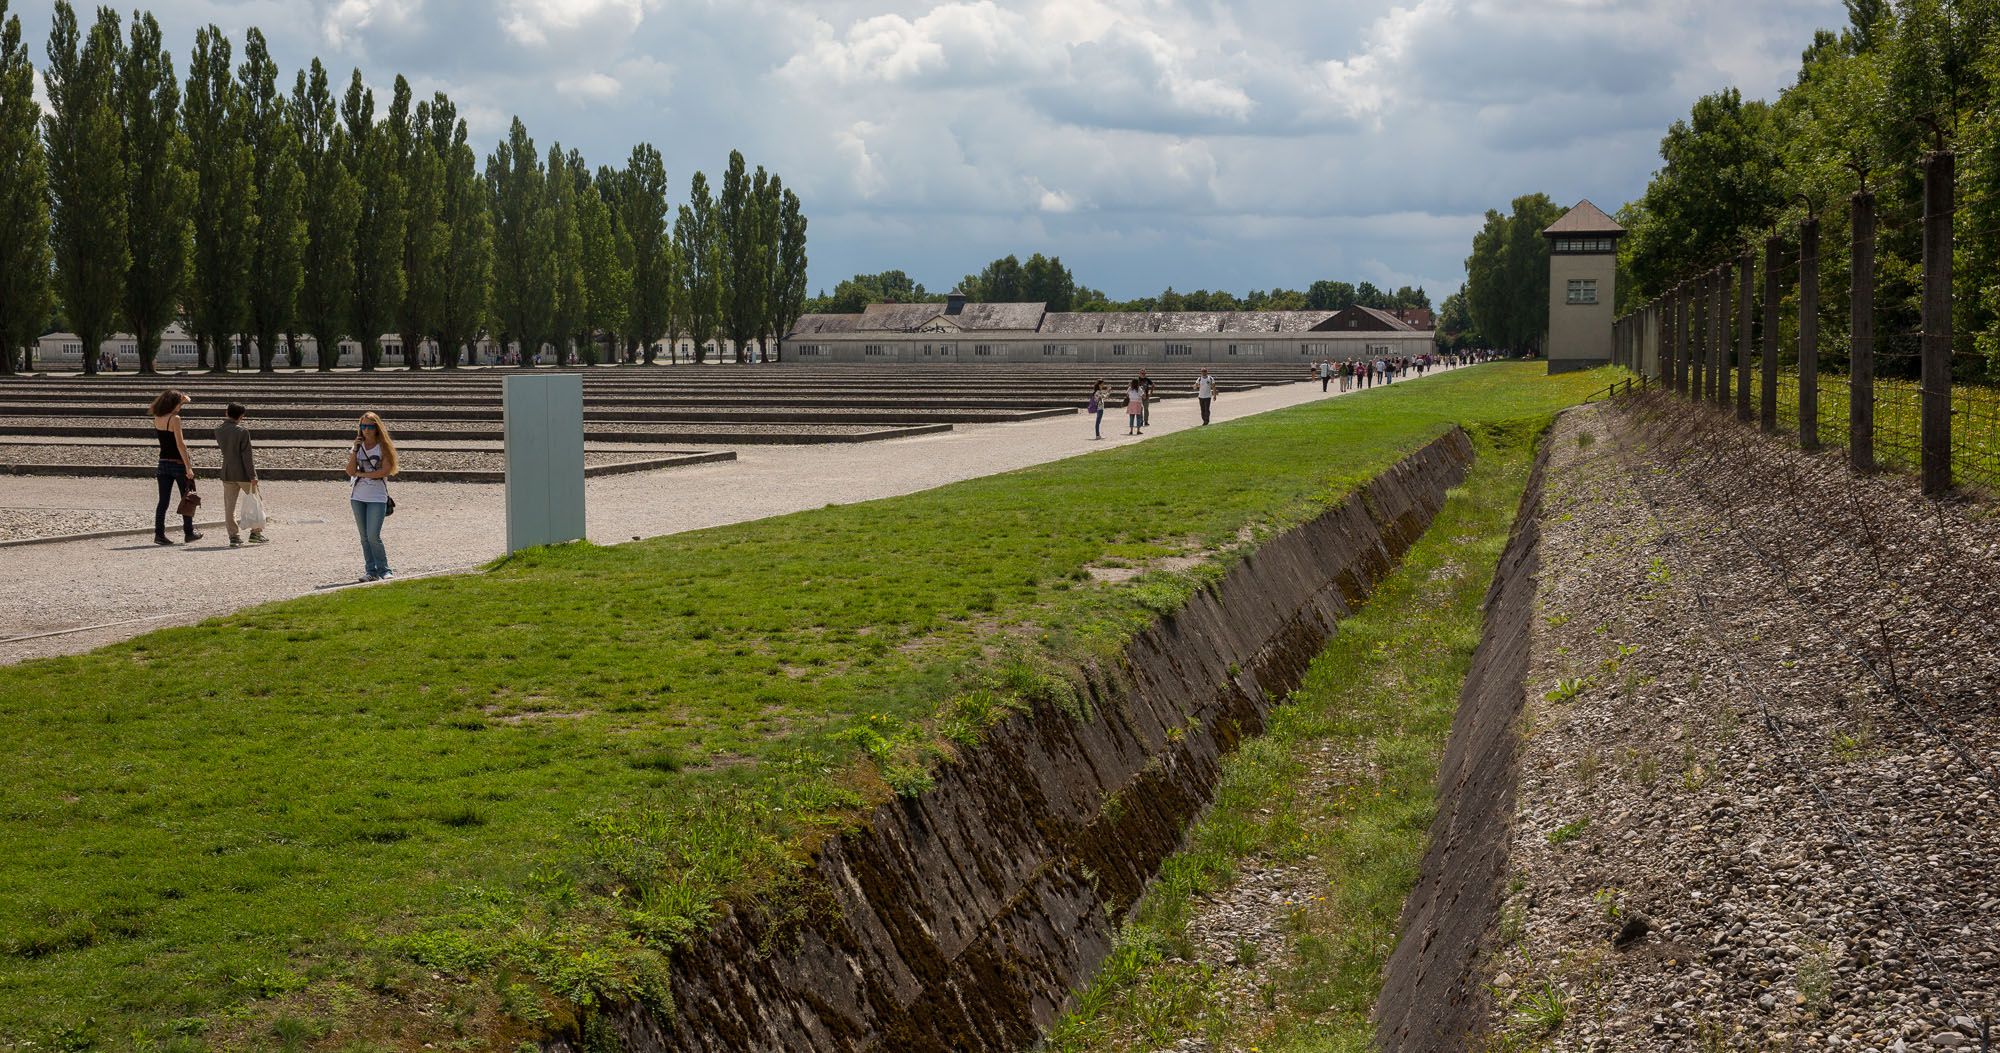 Featured image for “A Visit to Dachau Concentration Camp in Munich, Germany”